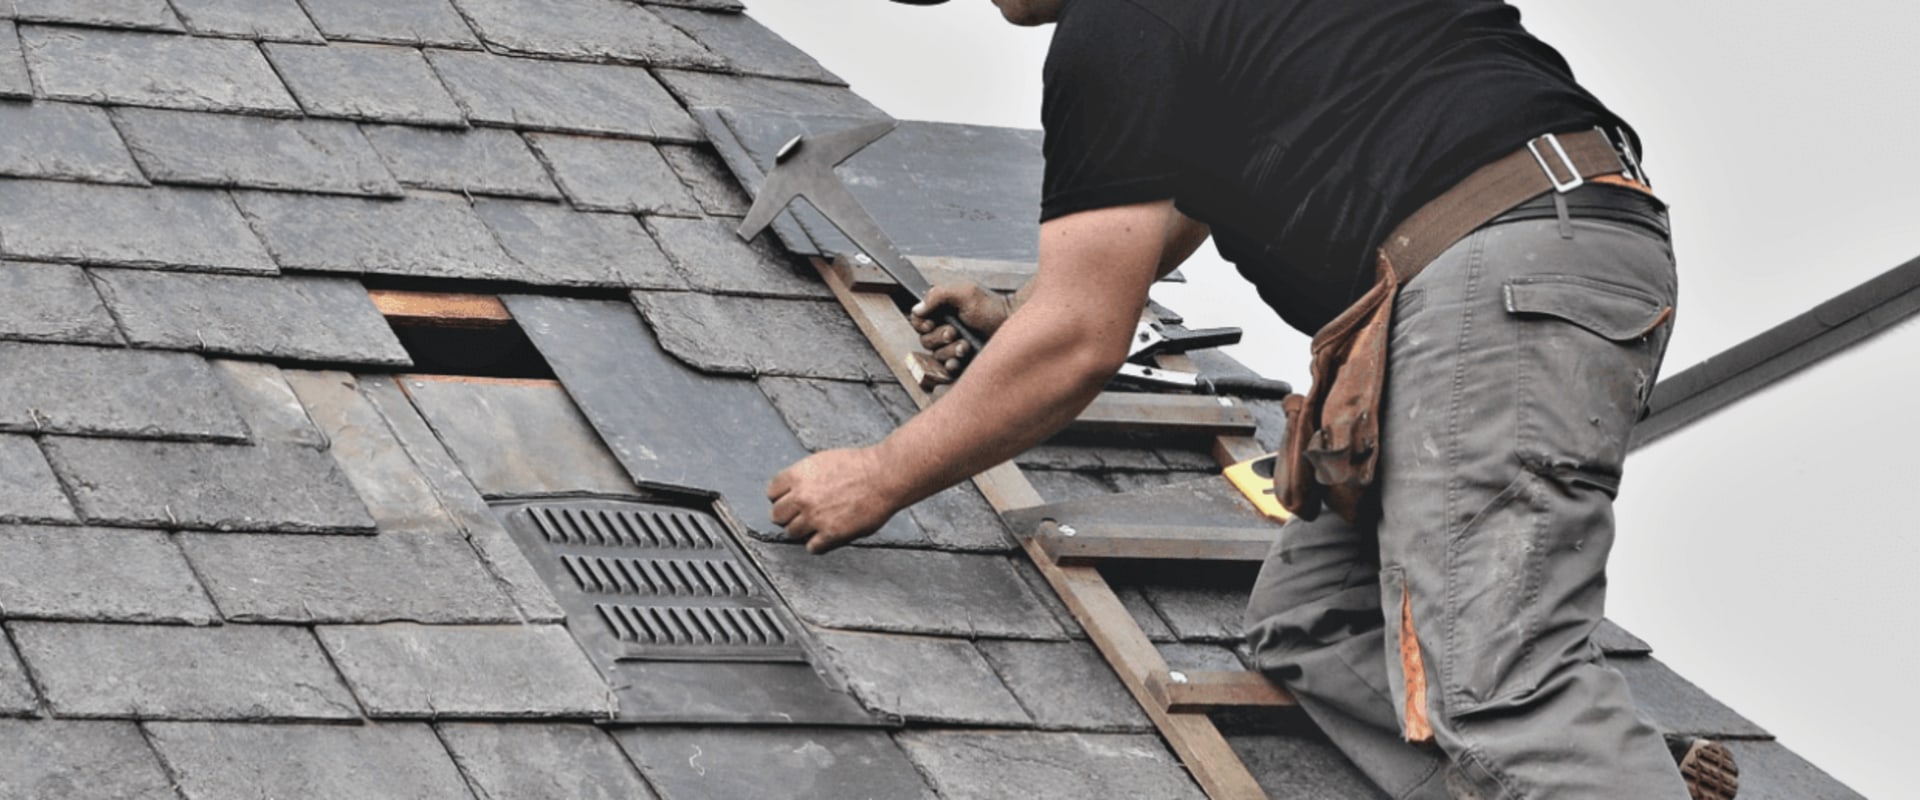 Can a roof be repaired rather than replaced?